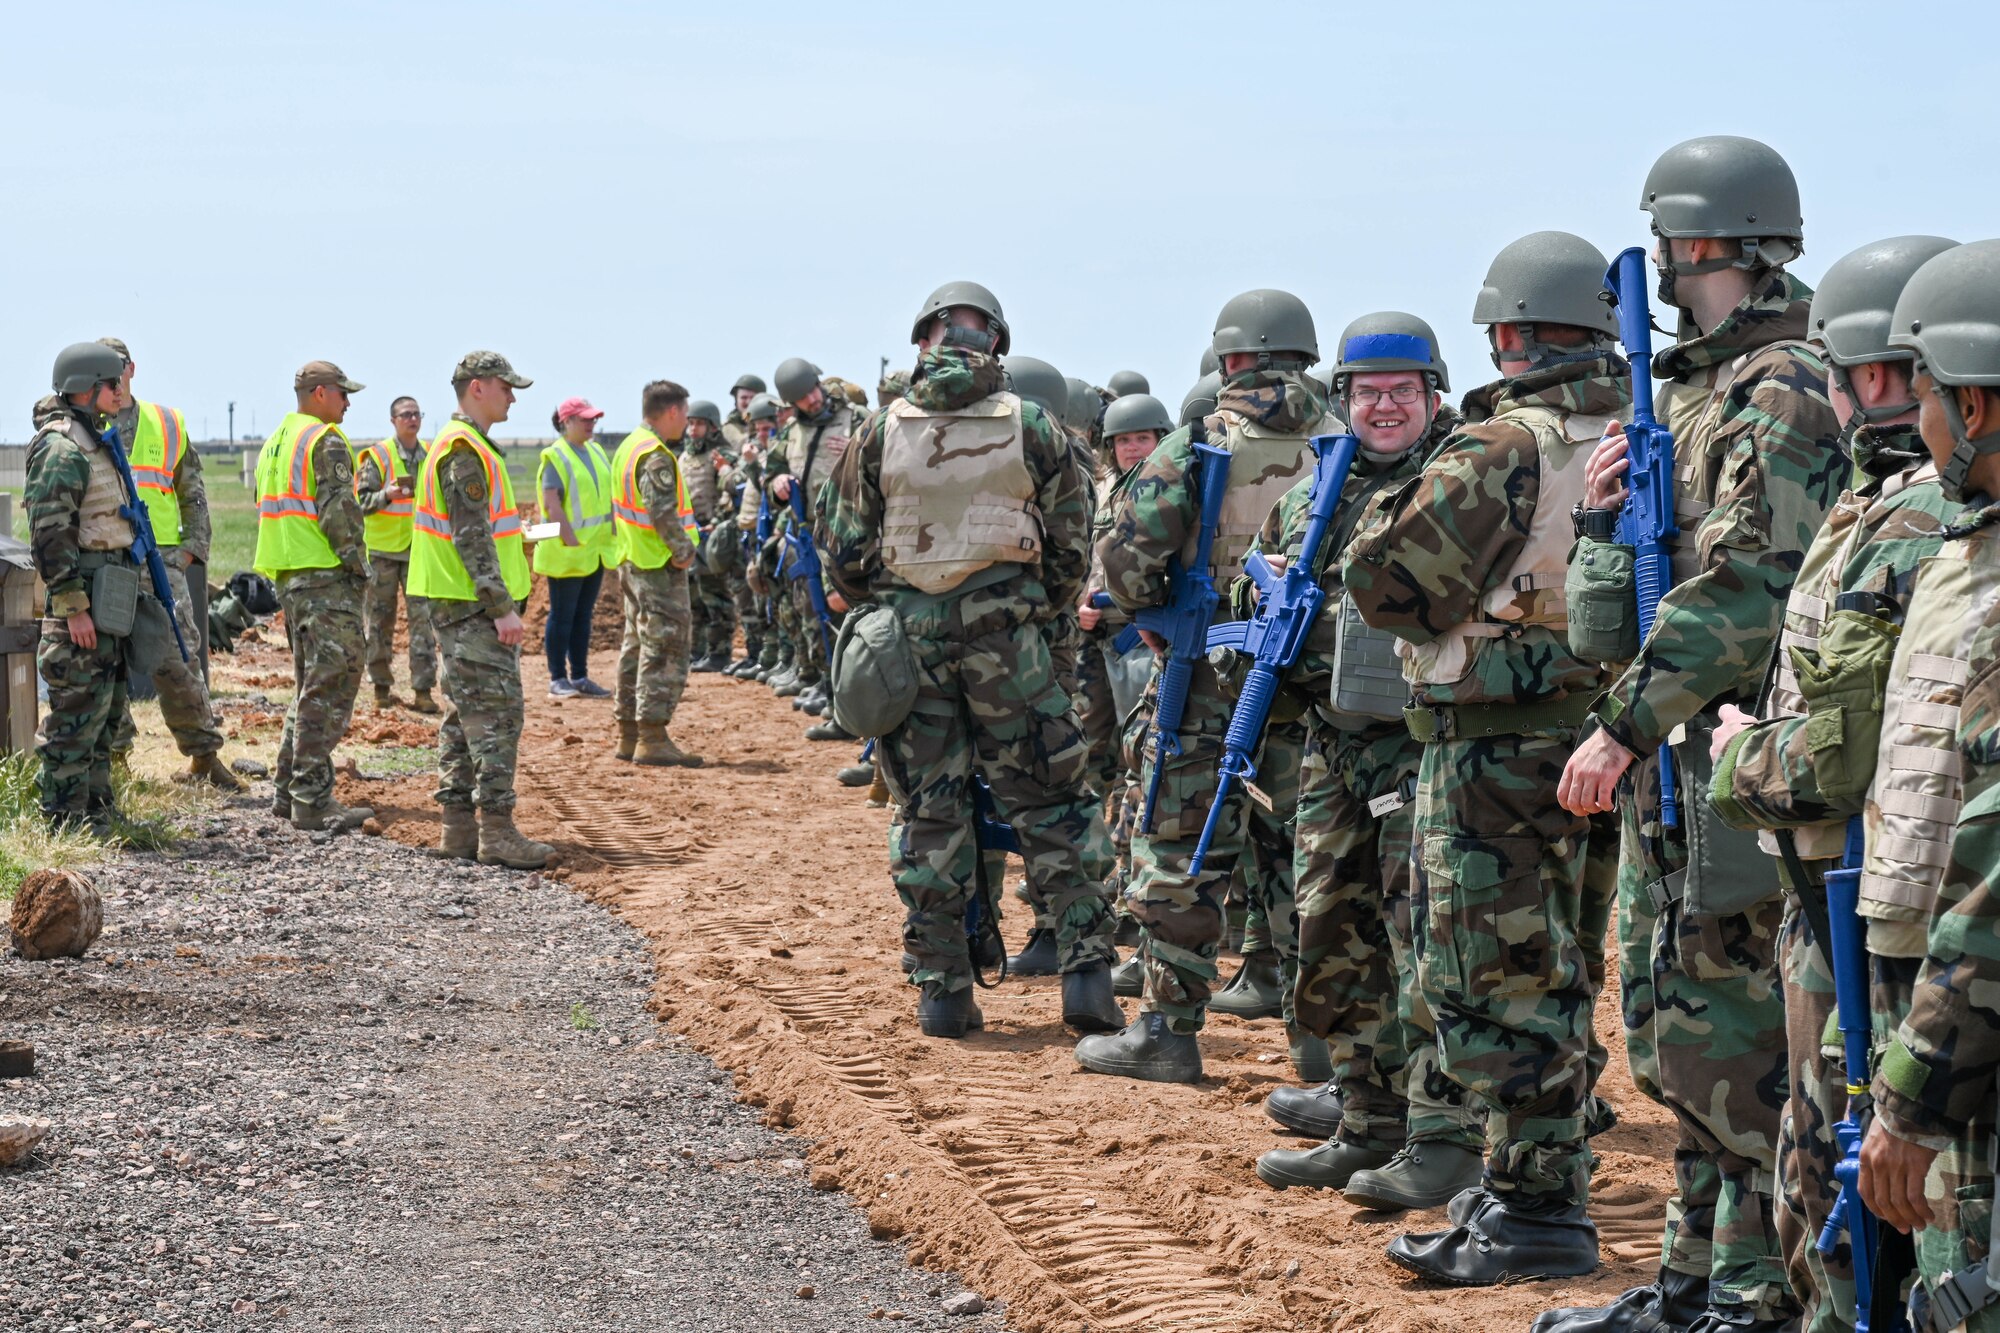 Airmen from the 97th Air Mobility Wing wait for a Chemical Biological Radiological Nuclear (CBRN) portion of their exercise to begin at Altus Air Force Base, Oklahoma, May 2, 2023. The Airmen were shown how to properly don and remove Mission Oriented Protective Posture gear, as well as tarping equipment during a CBRN hazard. (U.S. Air Force photo by Senior Airman Trenton Jancze)